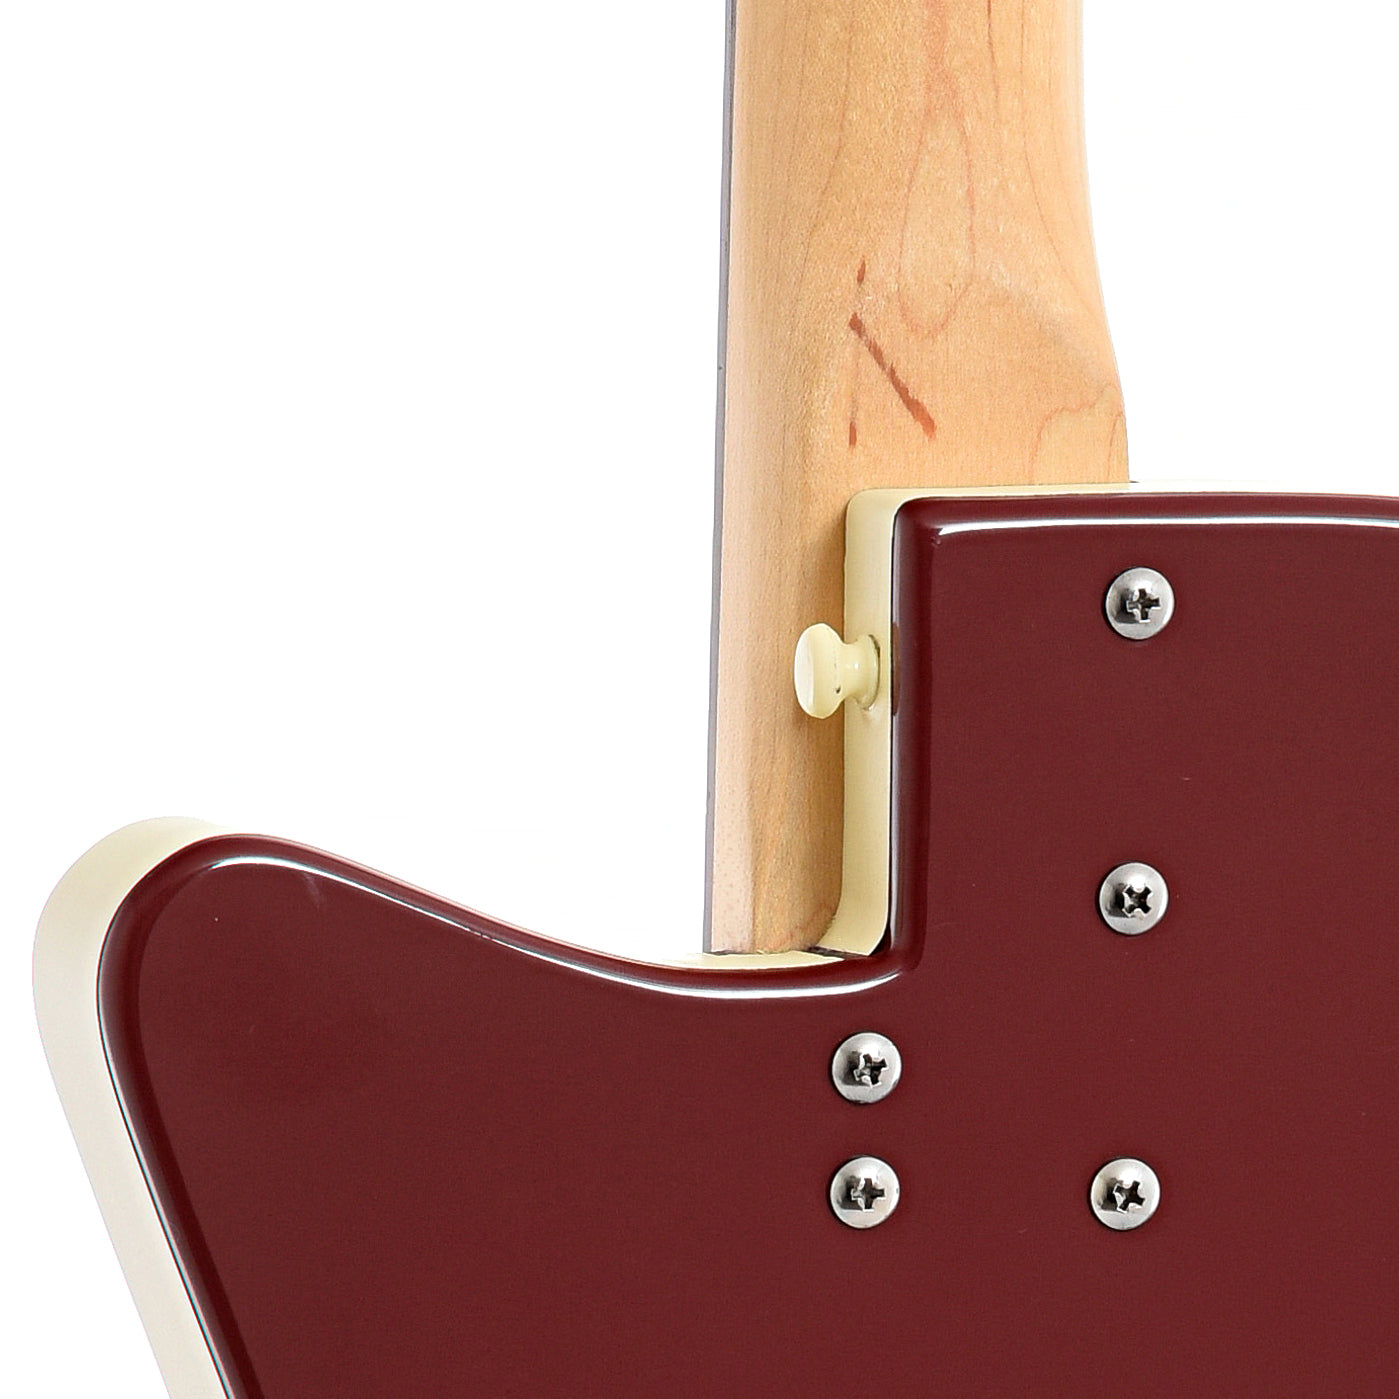 Neck joint of Danelectro 56 - U3 Reissue Electric Guitar (2000s)